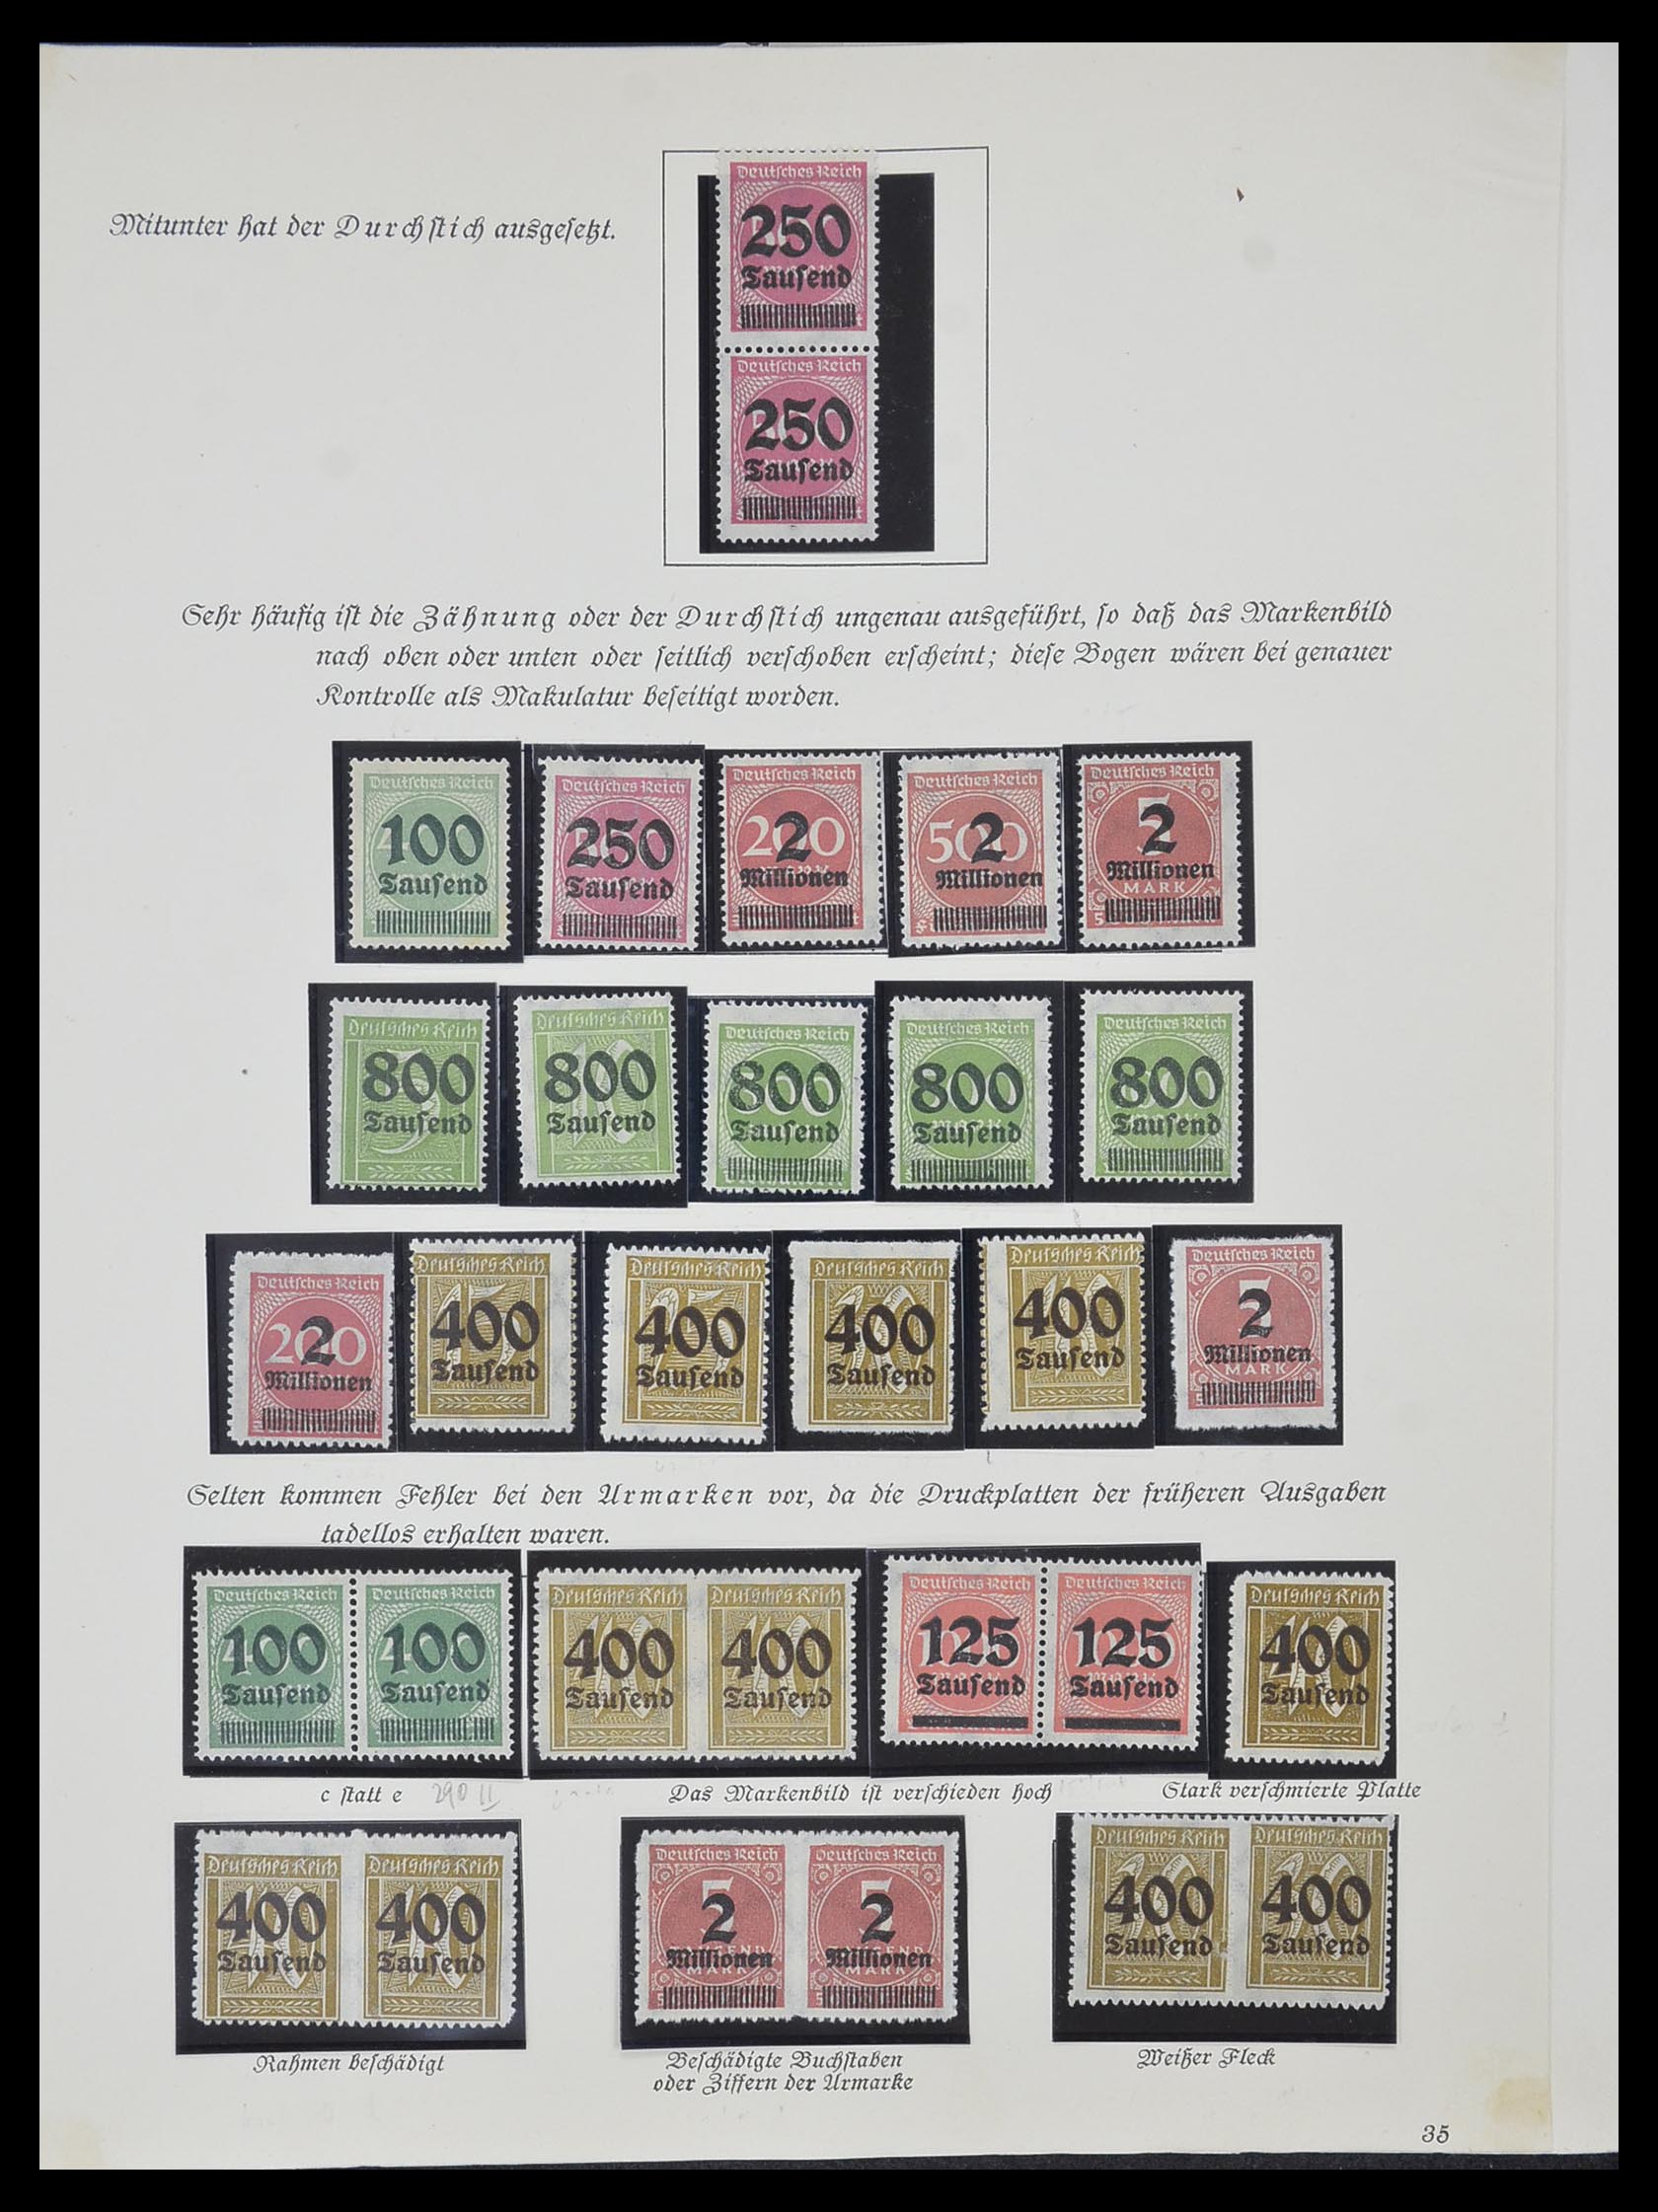 33957 015 - Stamp collection 33957 German Reich infla 1923.